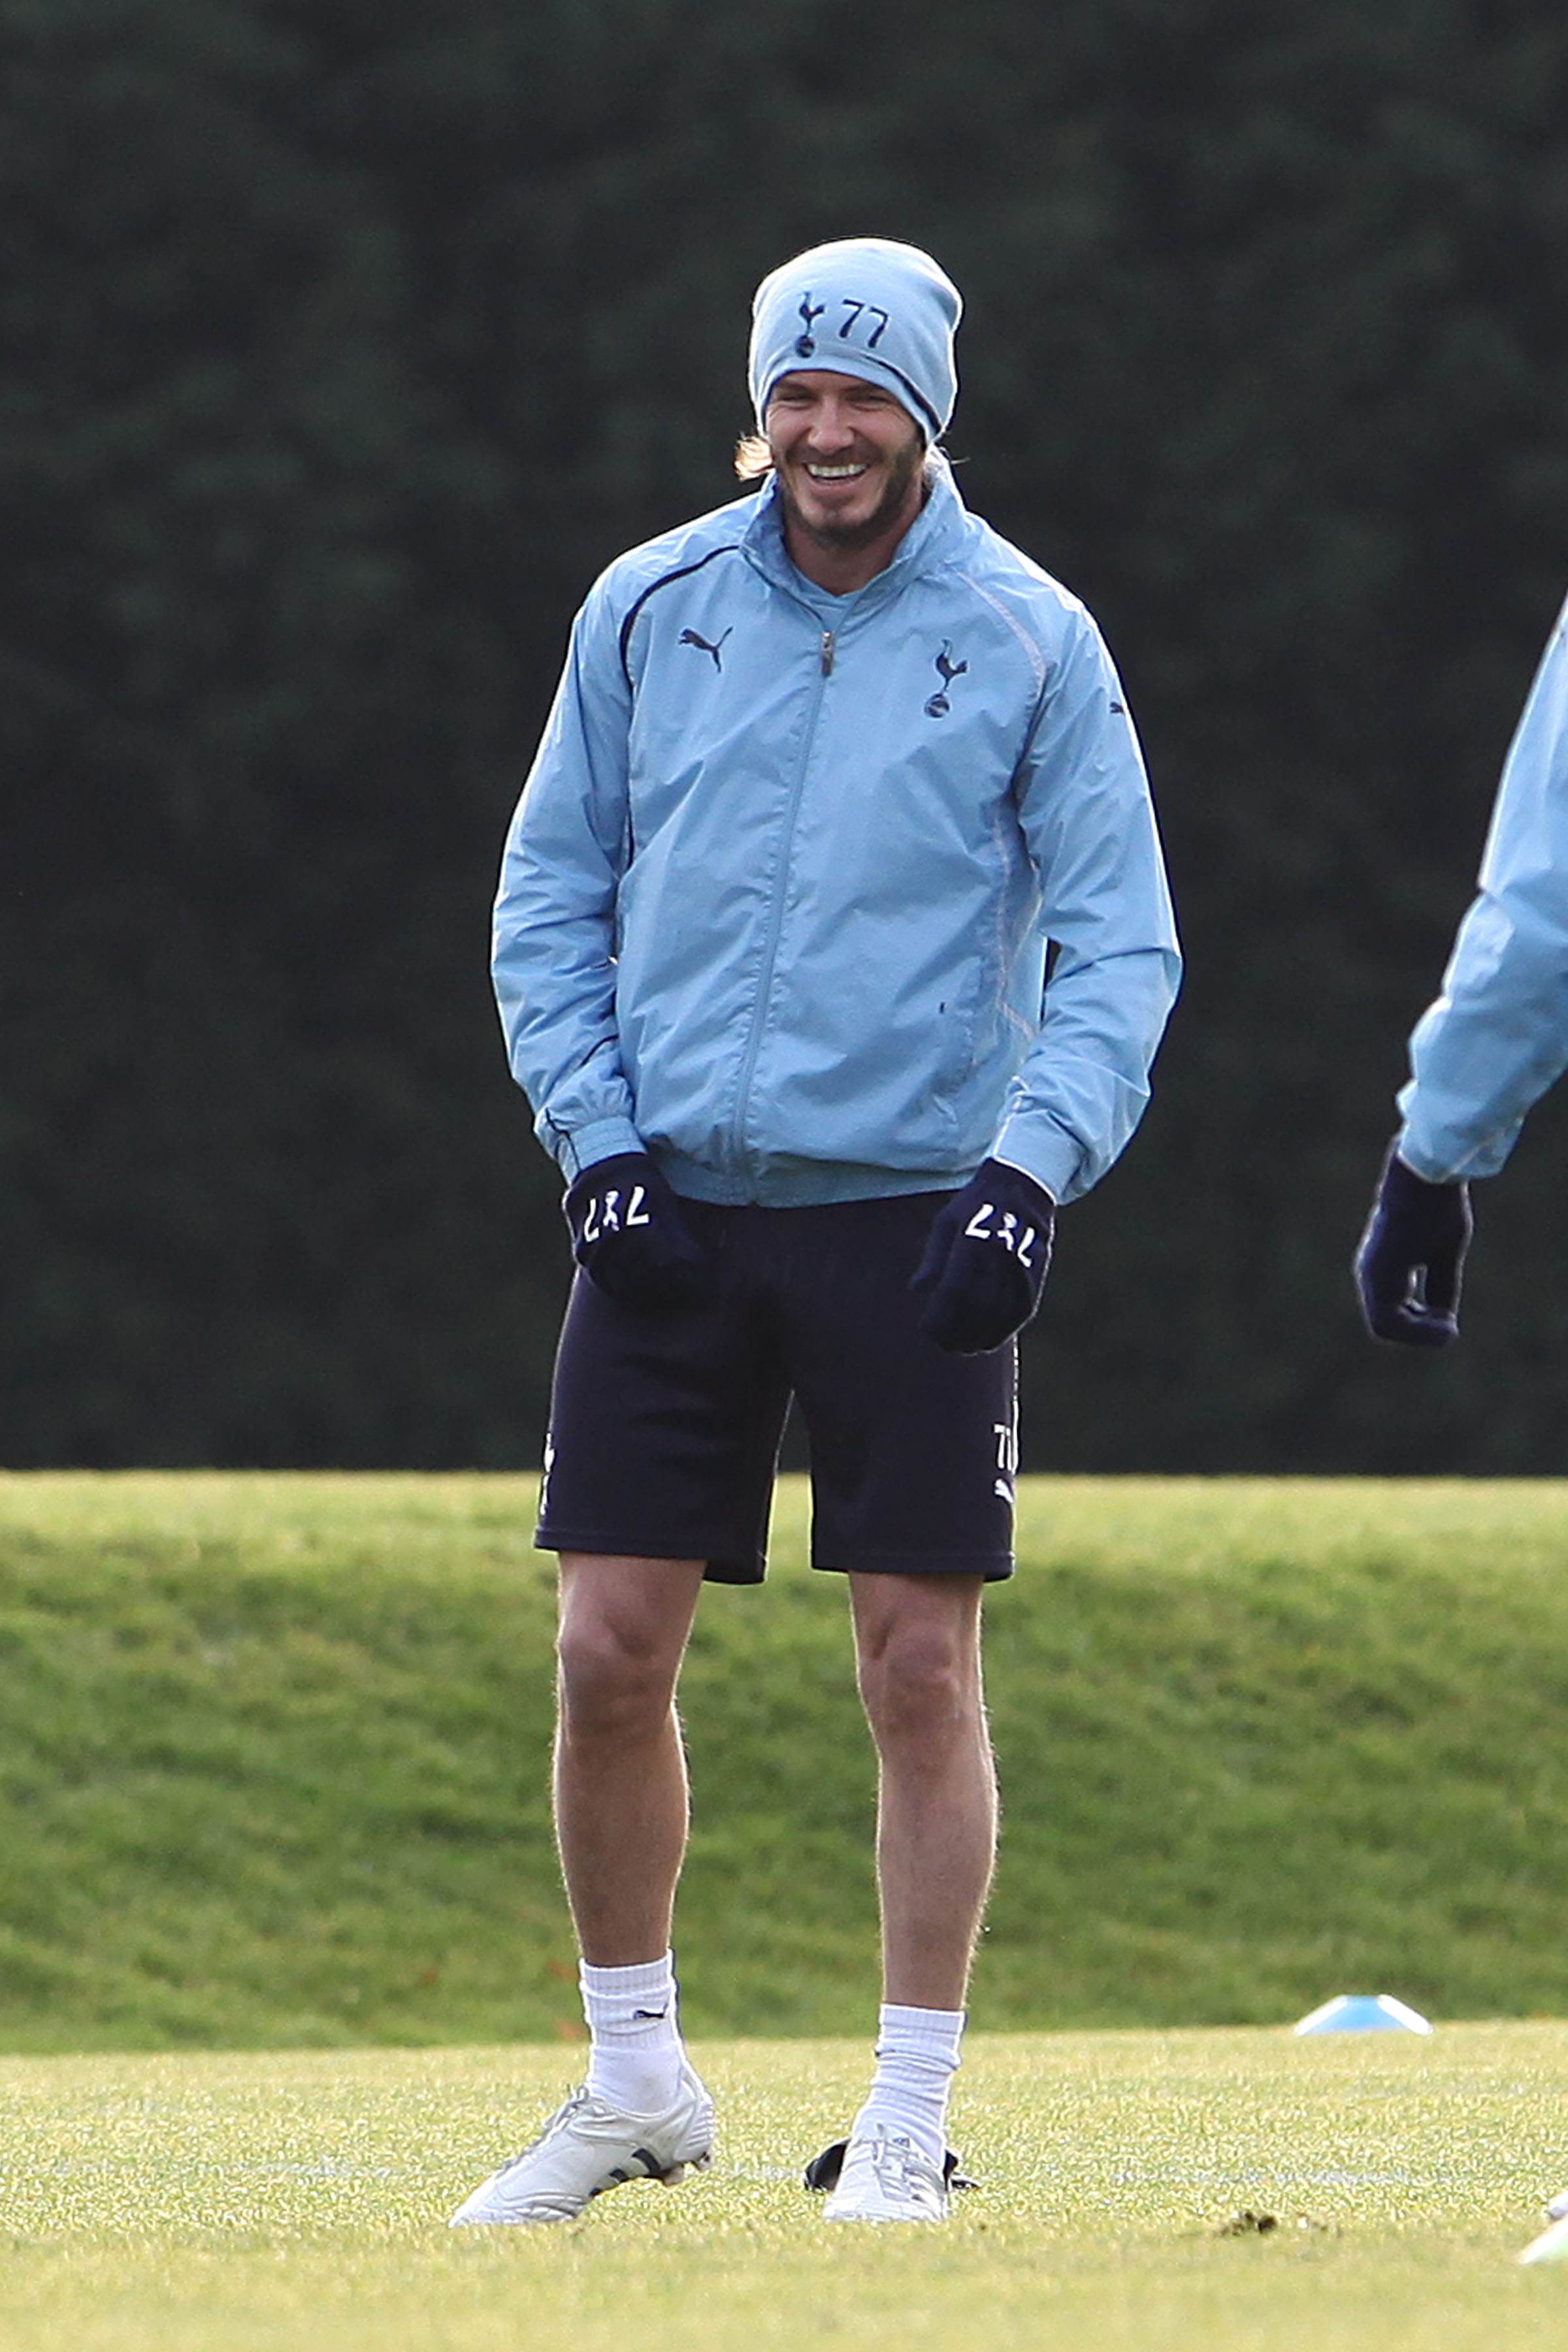 CHIGWELL, UNITED KINGDOM - JANUARY 11: David Beckham takes part in a Spurs training session with Tottenham Hotspur players on January 11, 2011 in Chigwell, England. (Photo by Neil Mockford/Getty Images)